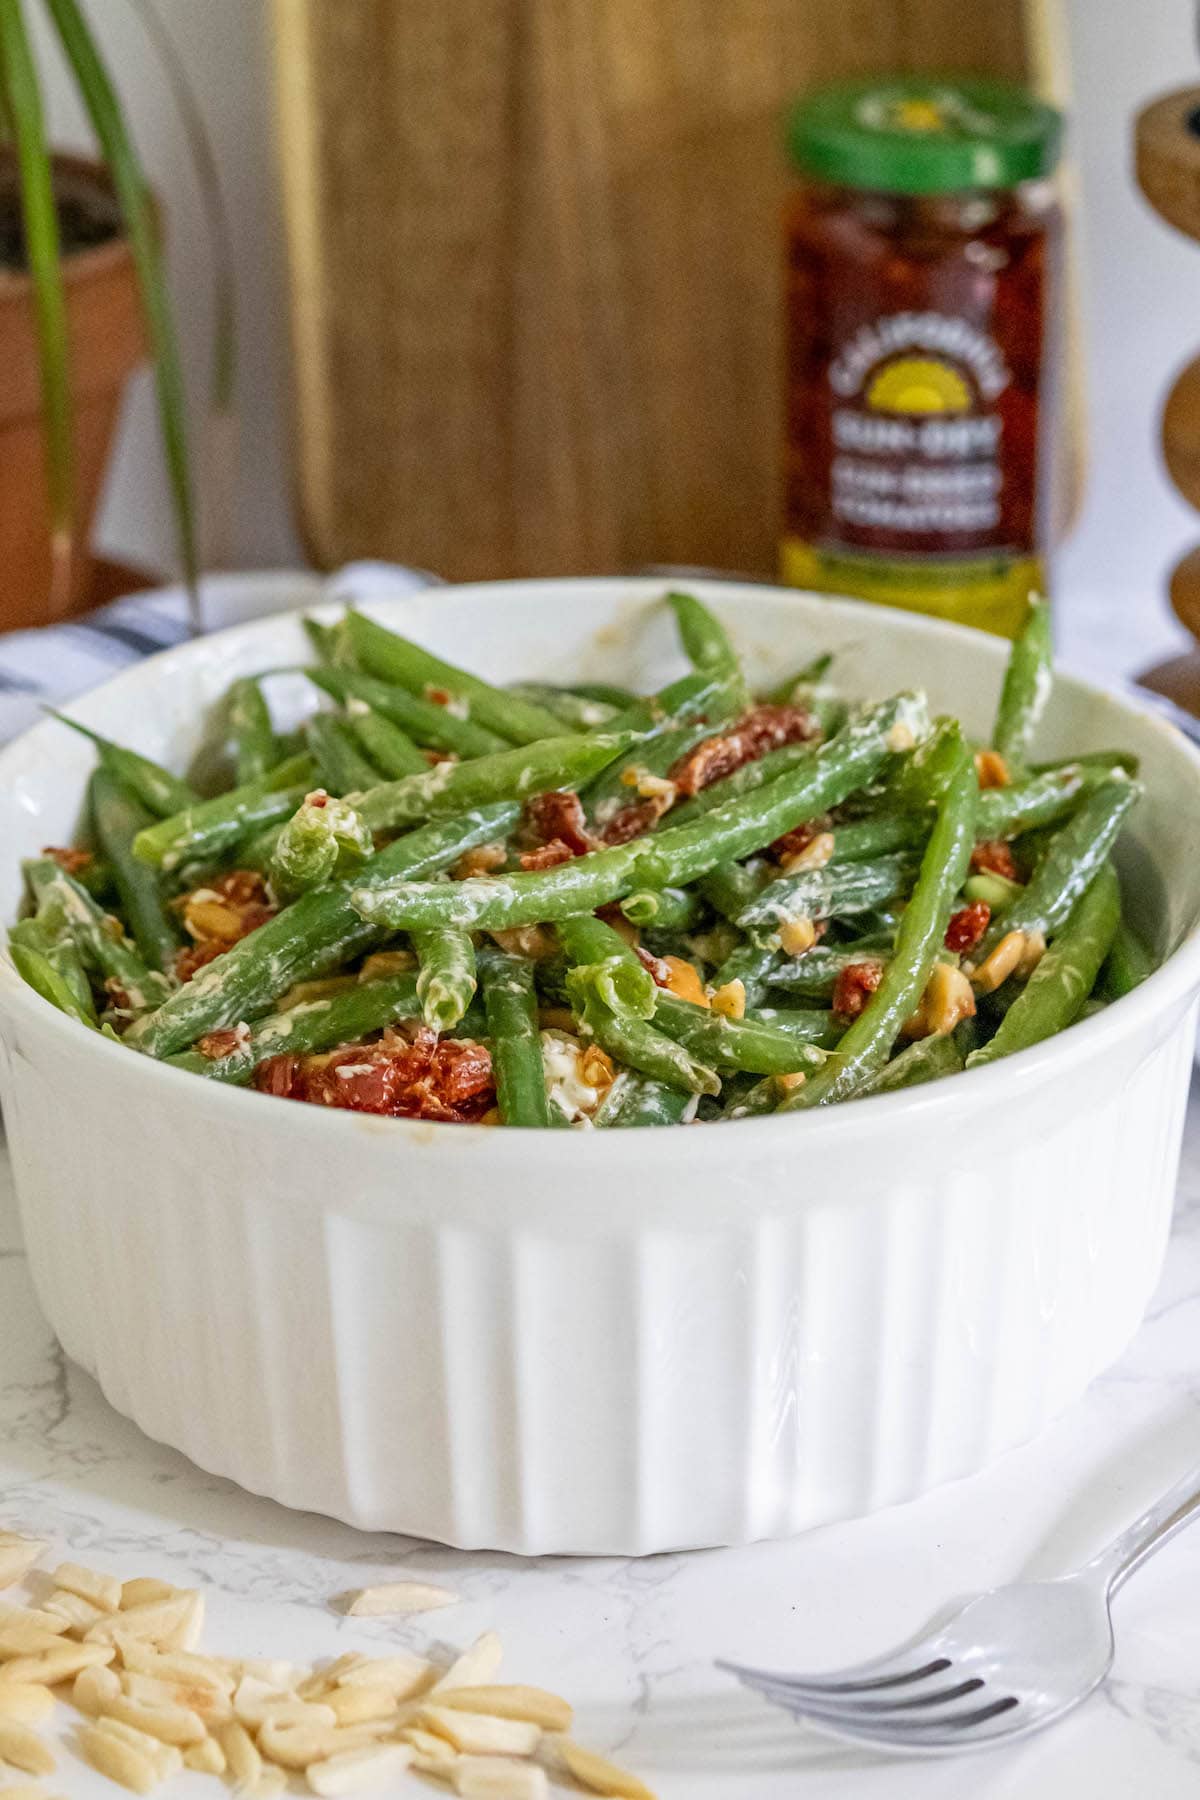 Cheesy baked green beans with sun-dried tomatoes.